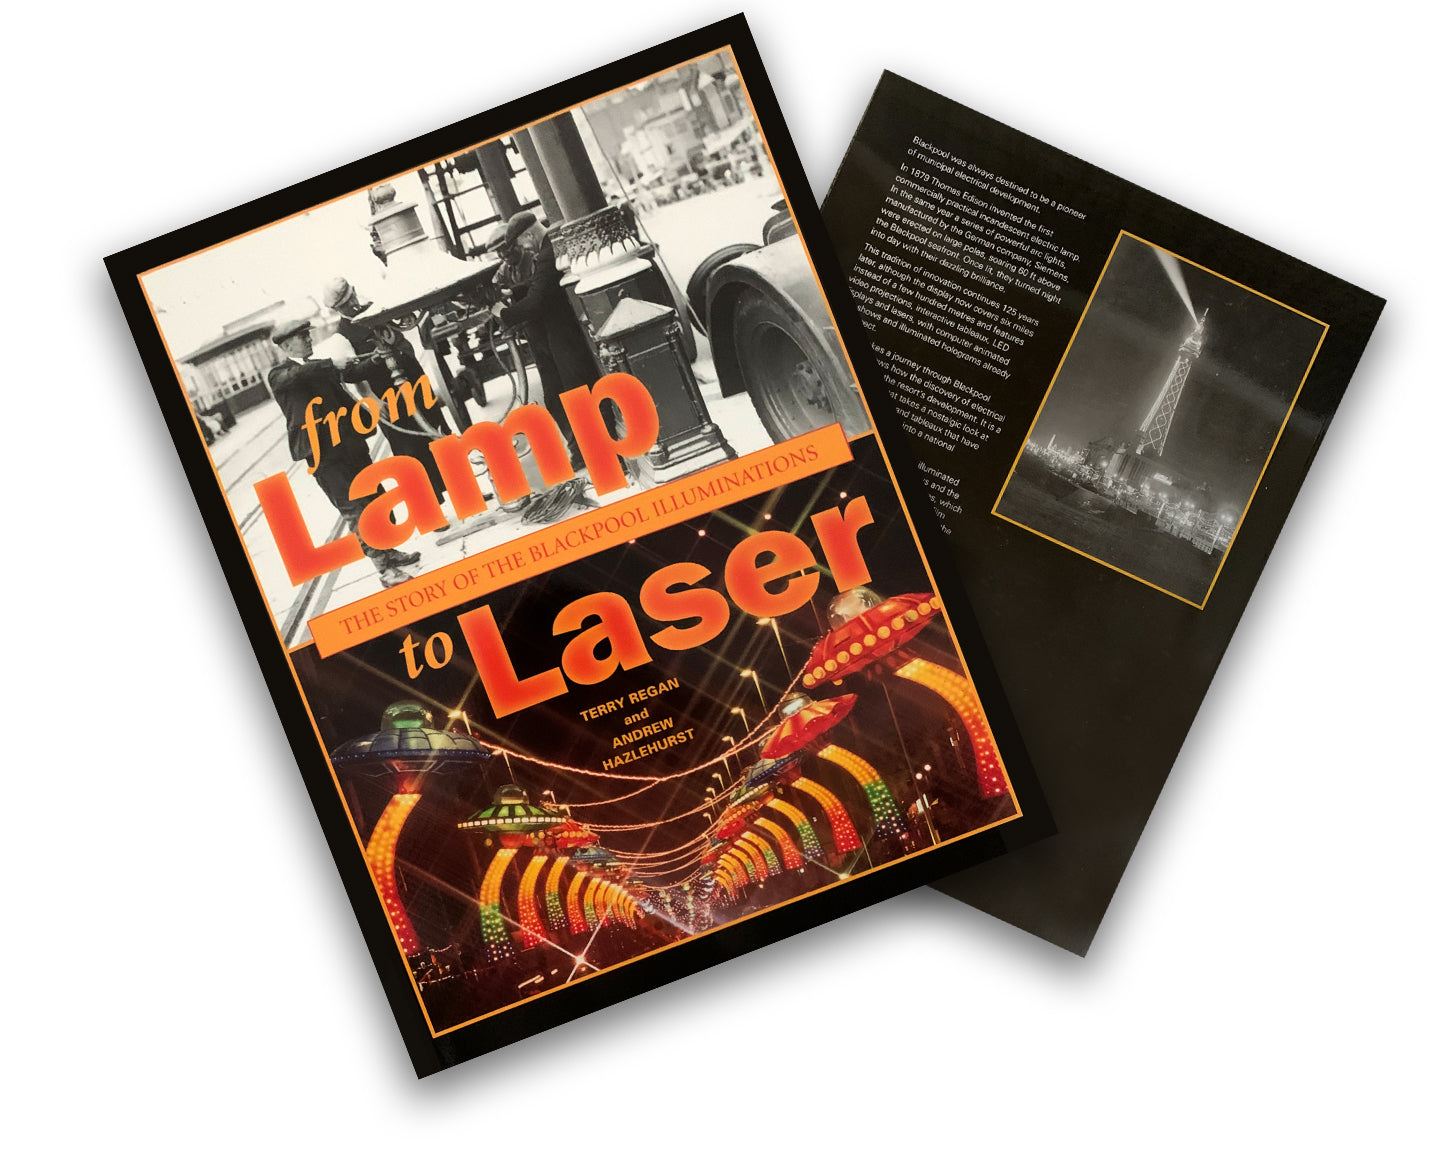 From Lamp to Laser : The story of Blackpool Illuminations